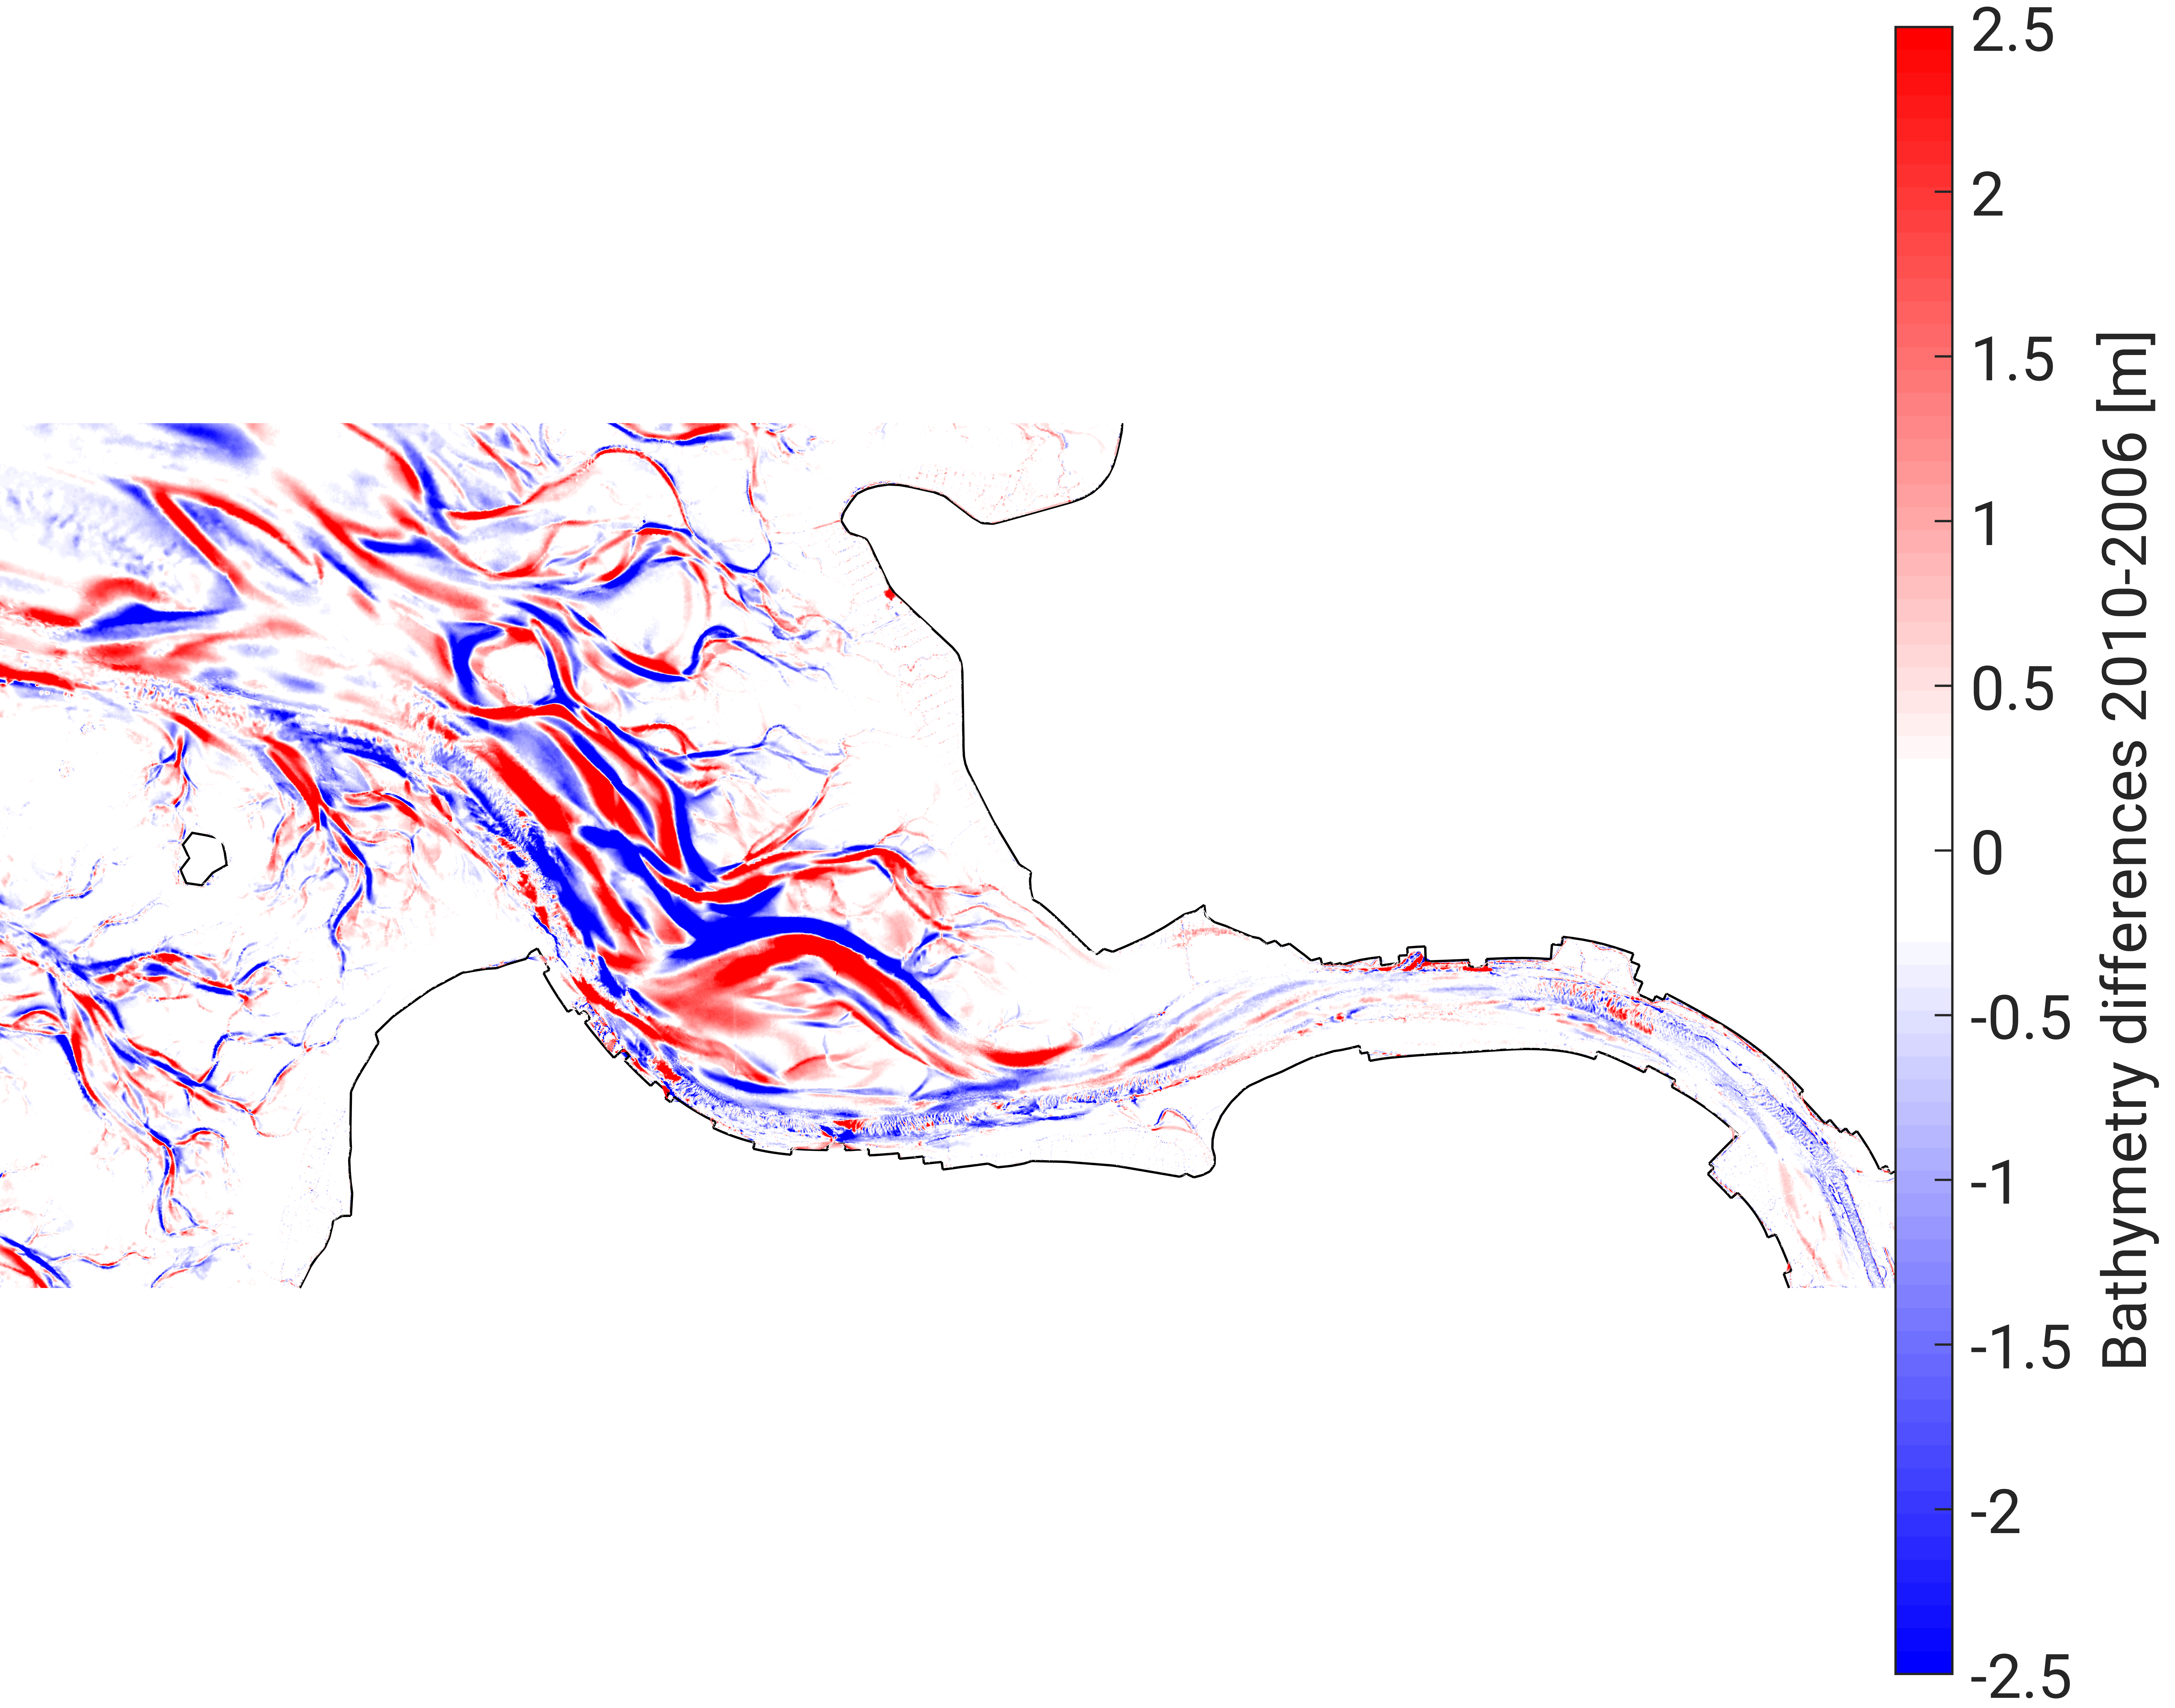 Bathymetry difference from the Elbe astuary between 2006 and 2010